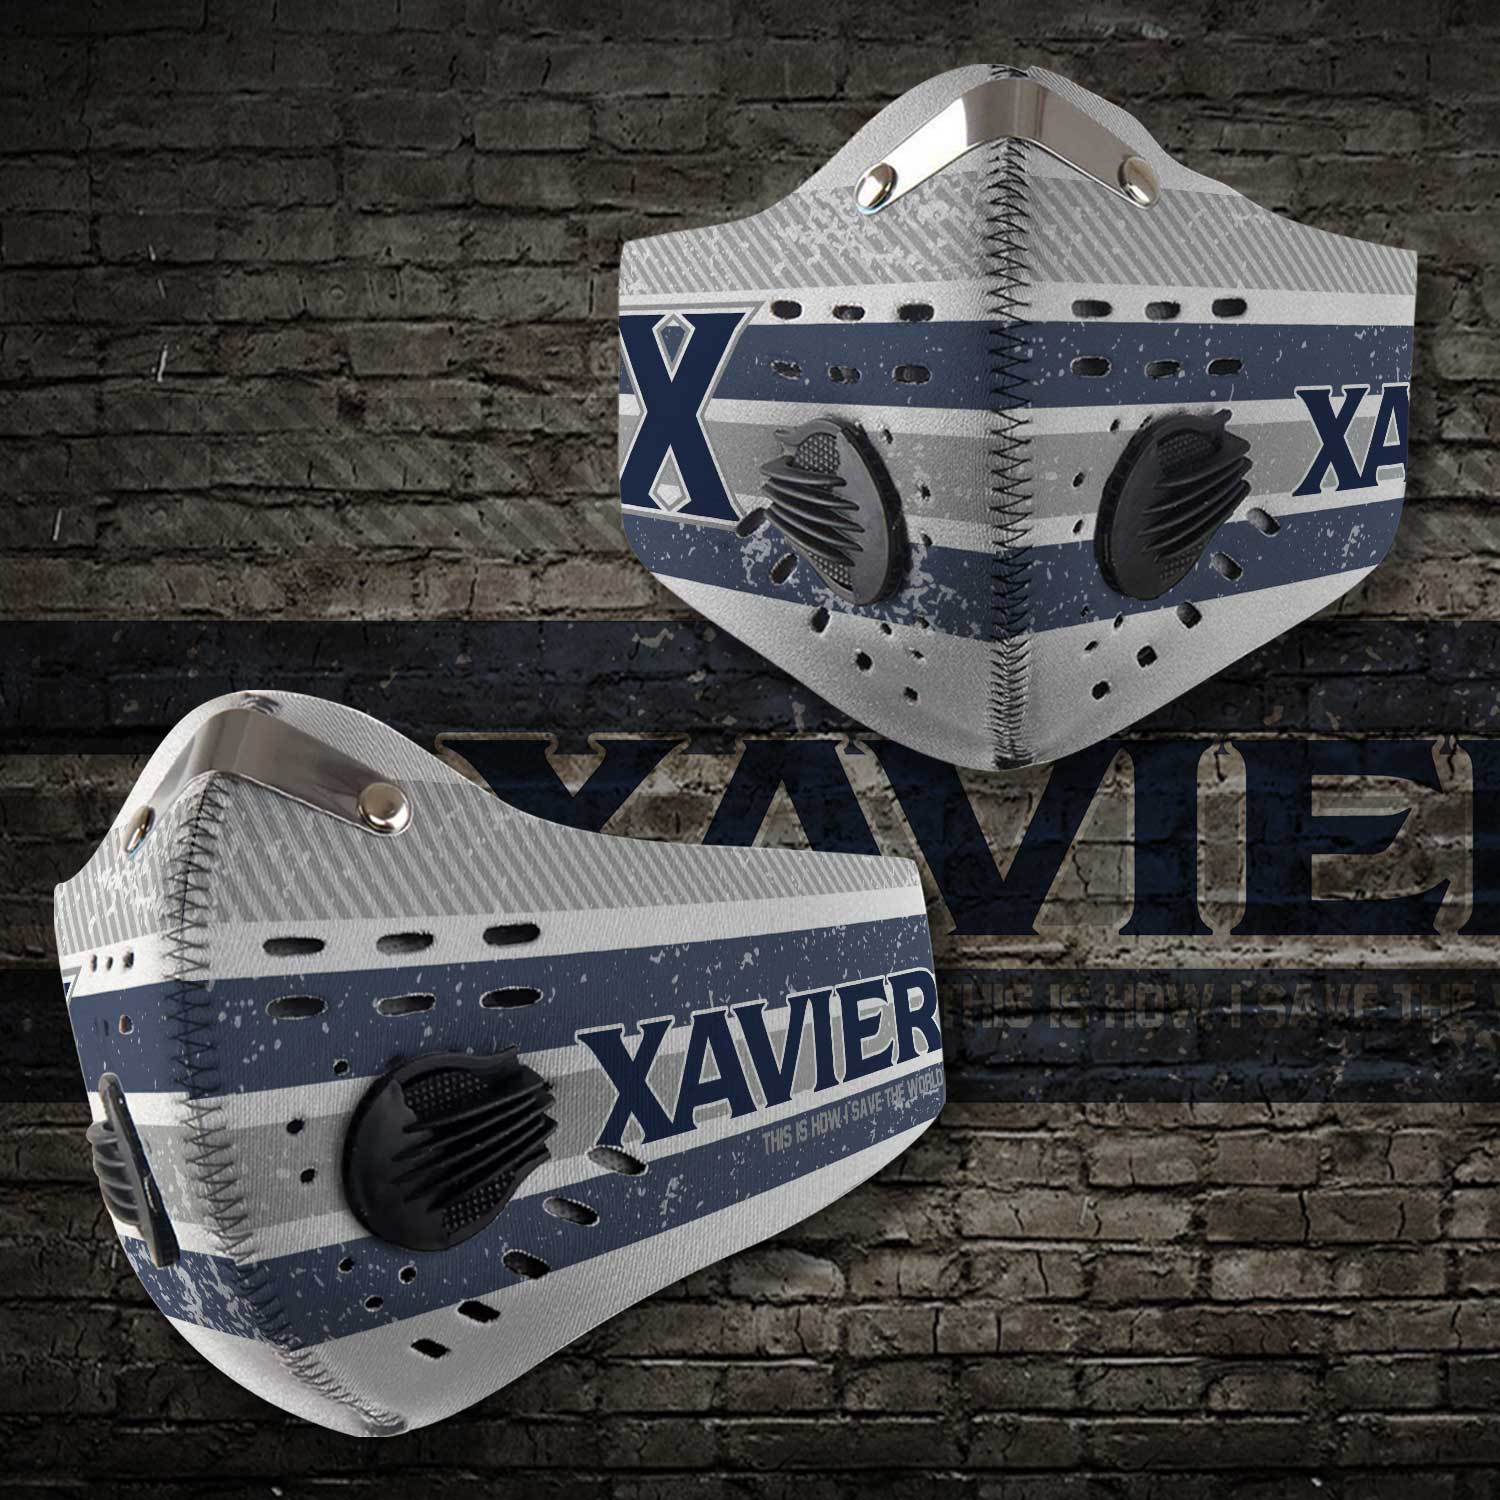 Xavier musketeers this is how i save the world carbon filter face mask